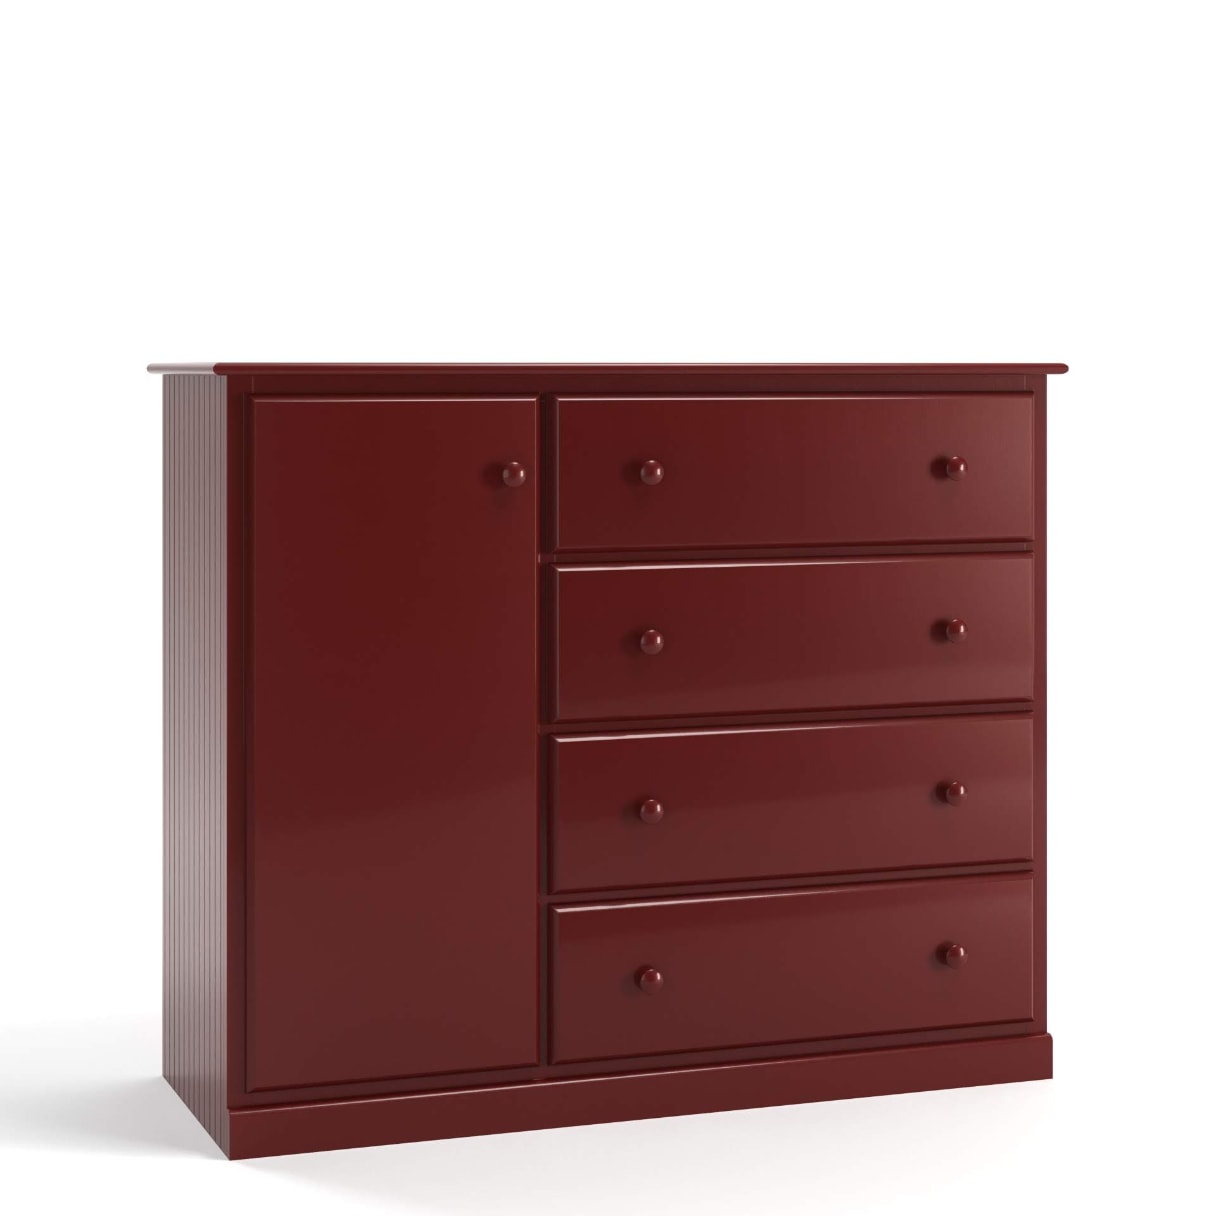 Acadia Cottage Wardrobe with four drawers and two adjustable shelves. It has bead board sides and two adjustable shelves.  Pictured in heritage red.